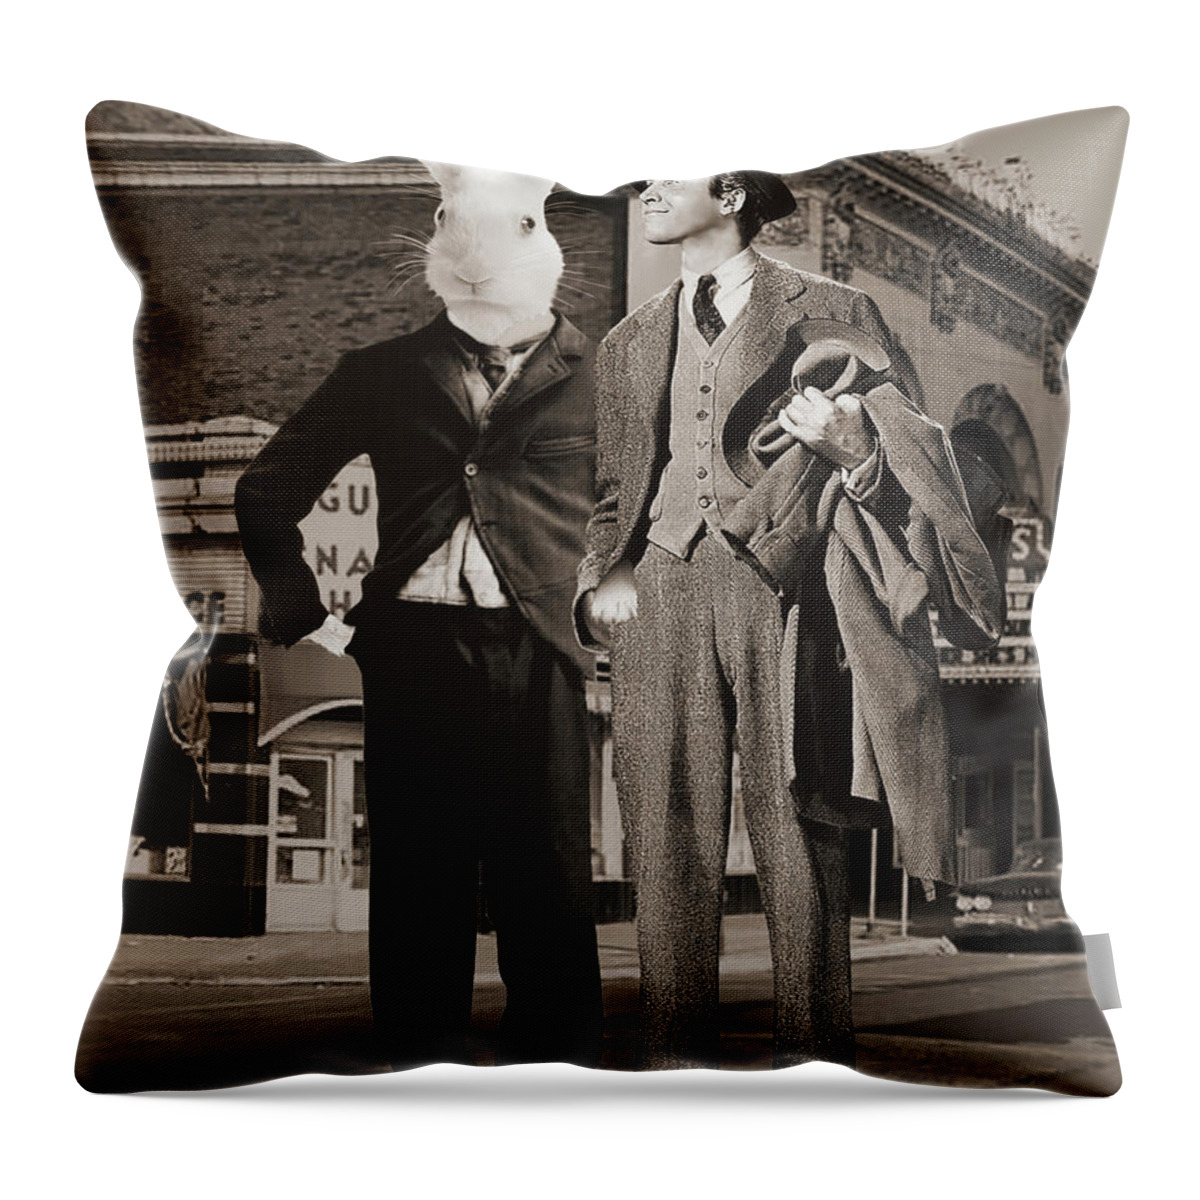 Harvery Throw Pillow featuring the digital art Walking With Harvey by M Spadecaller